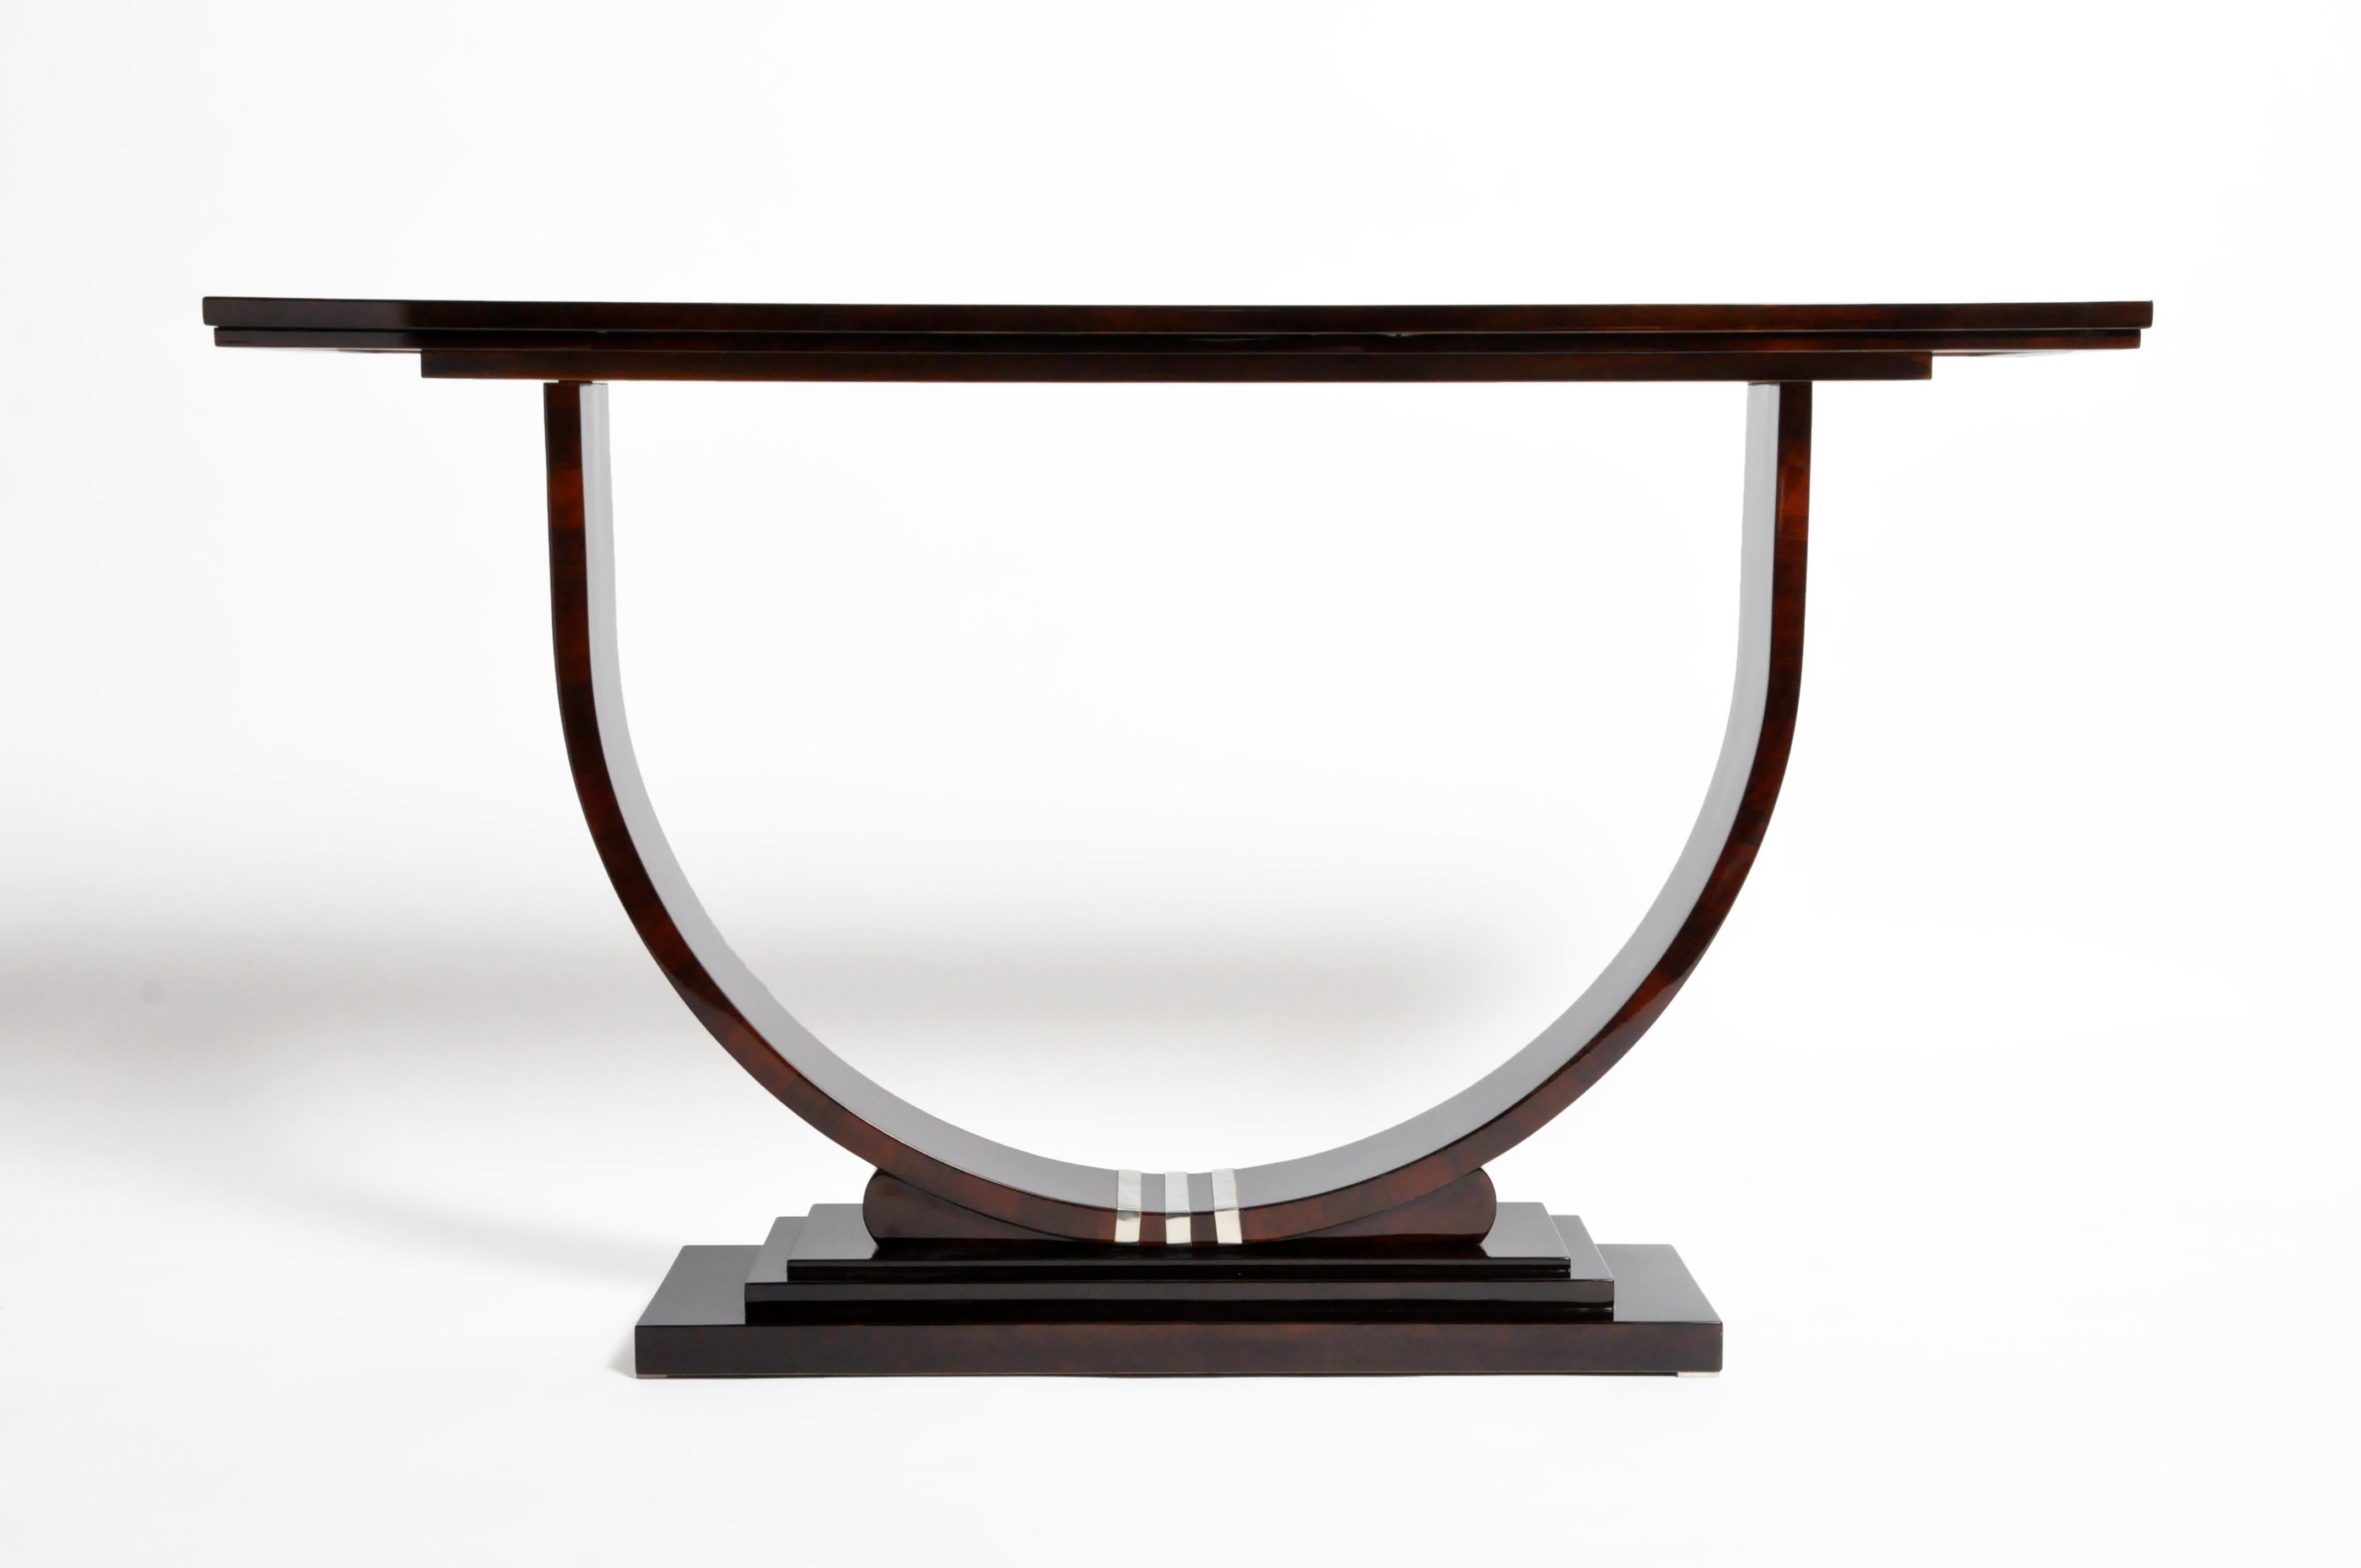 Stunning midcentury style console with dark walnut veneer and chrome accents. This piece imparts a chic, architectural elegance with its fine lines and U-shaped base.